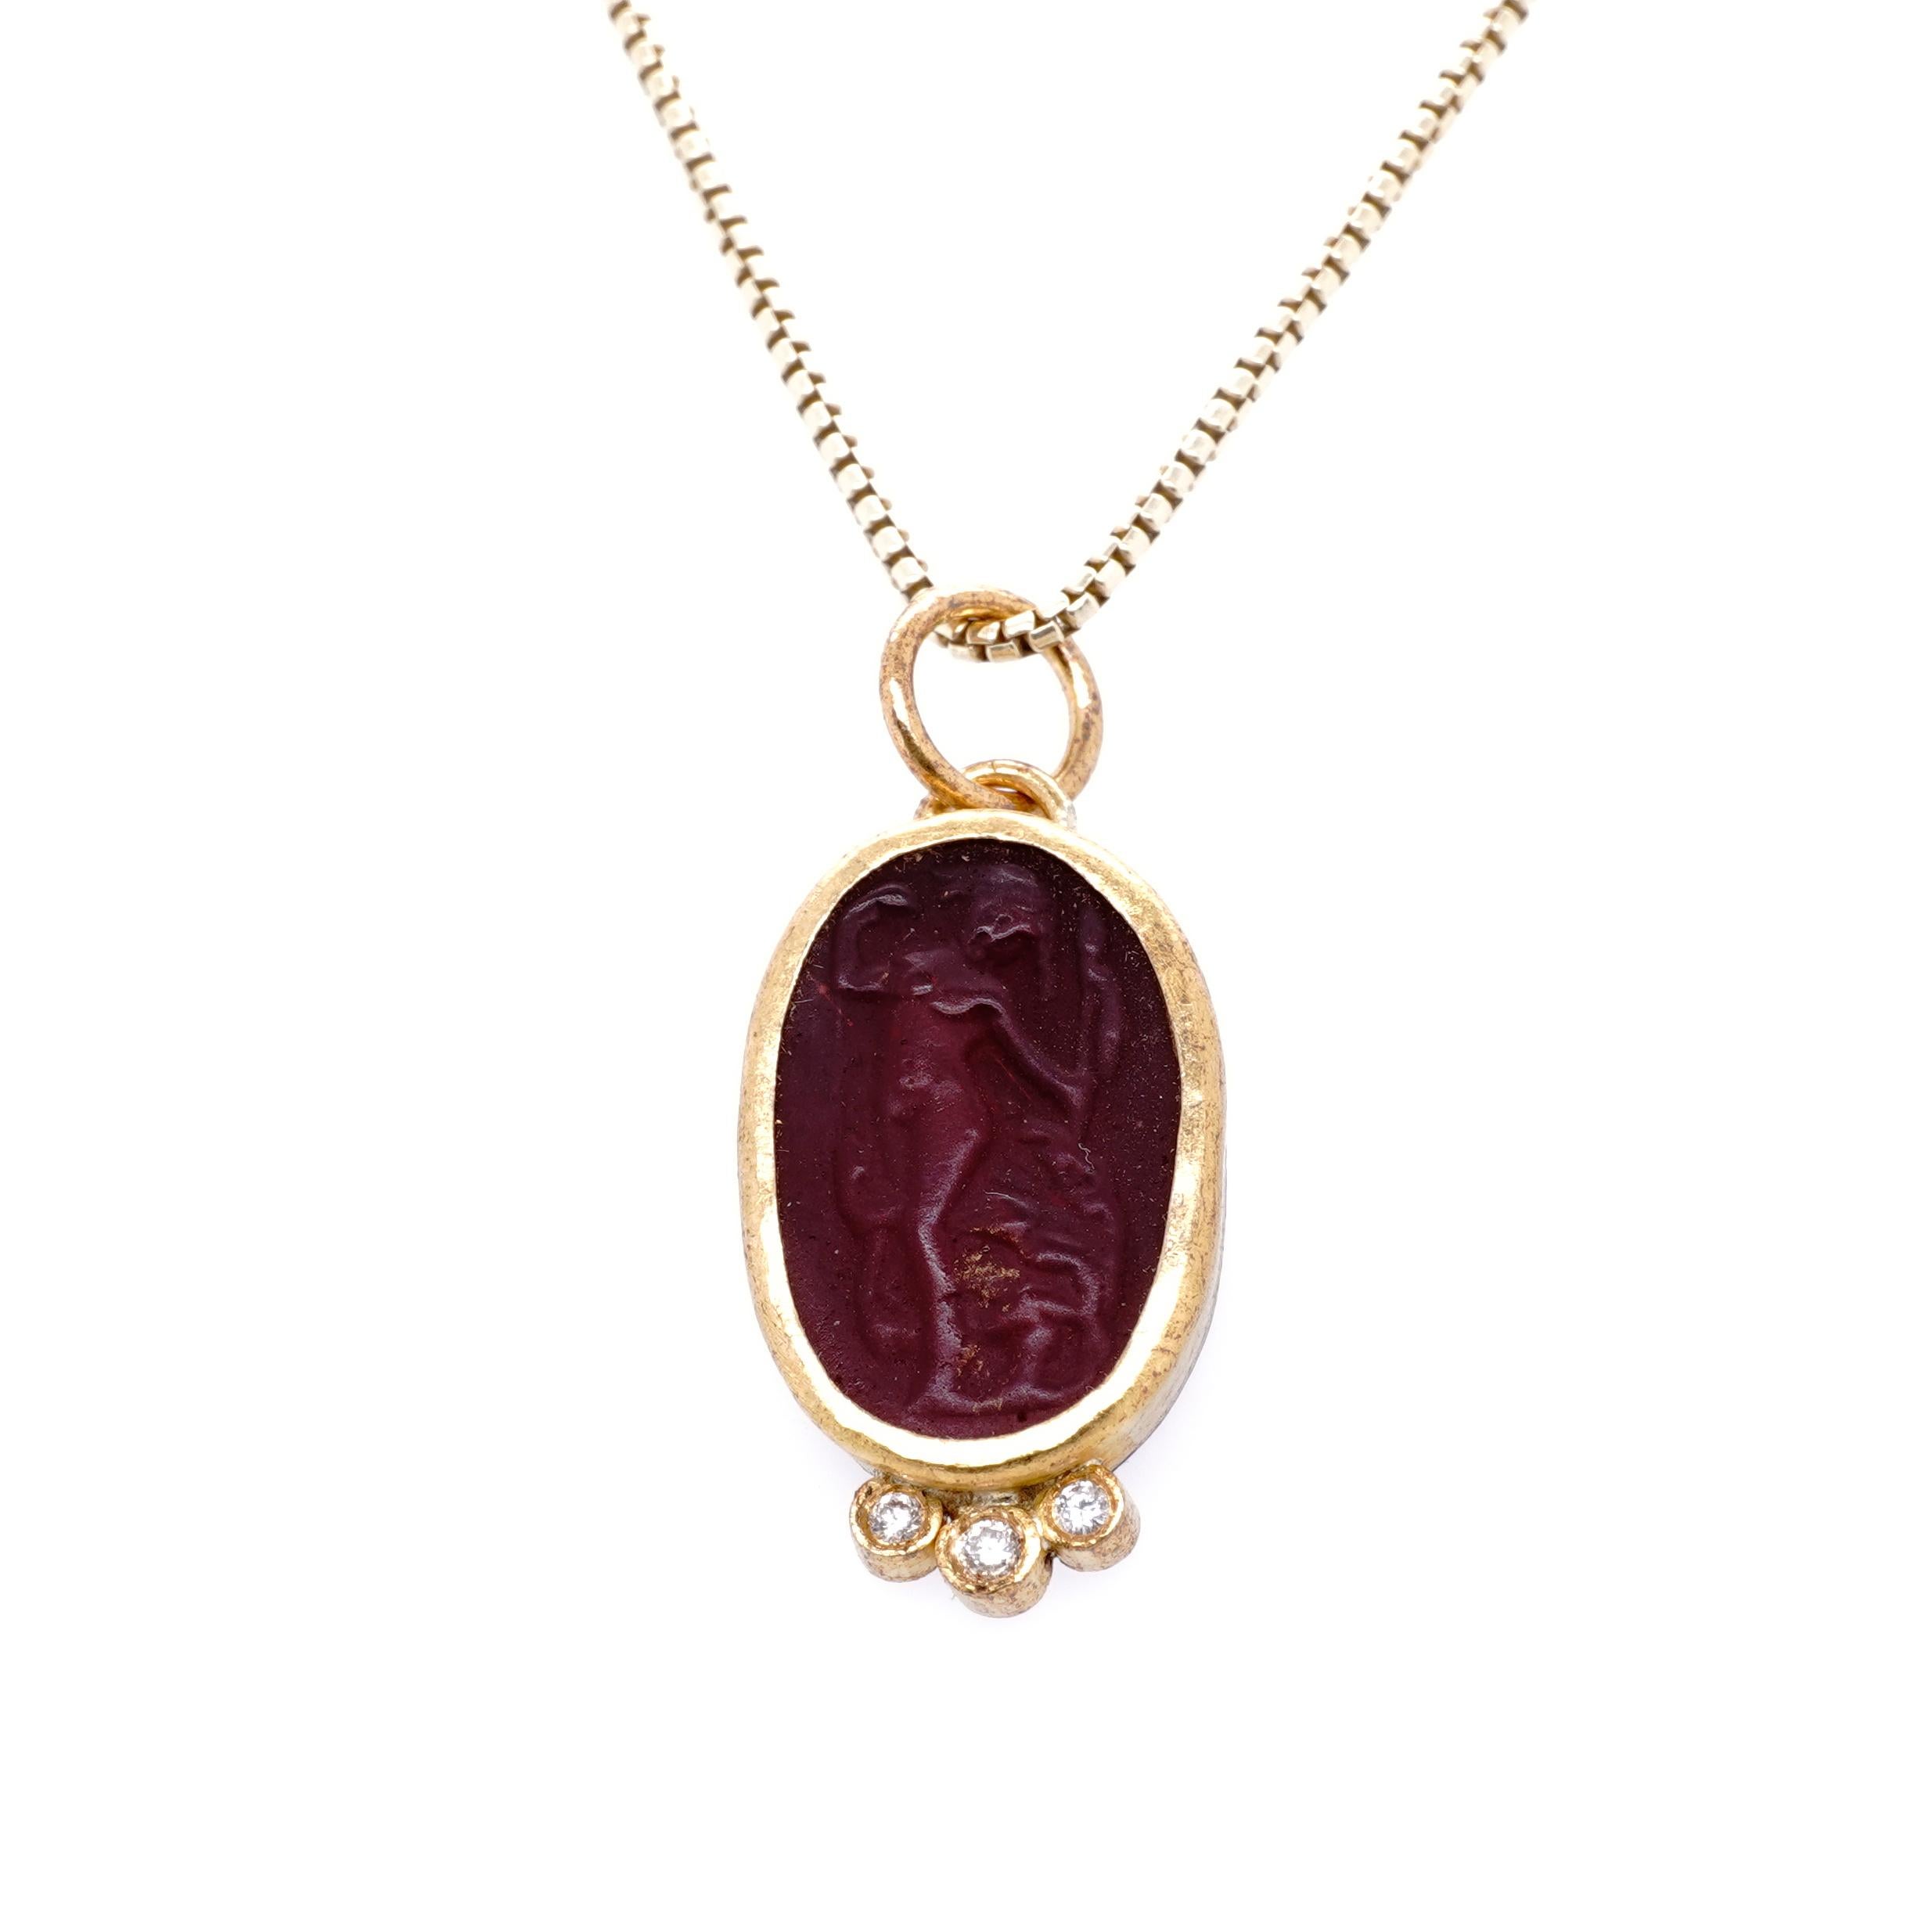 Oval Cut The Joy of Life, Roman Woman Intaglio, Carved Agate, Coin Charm Amulet 24kt Gold